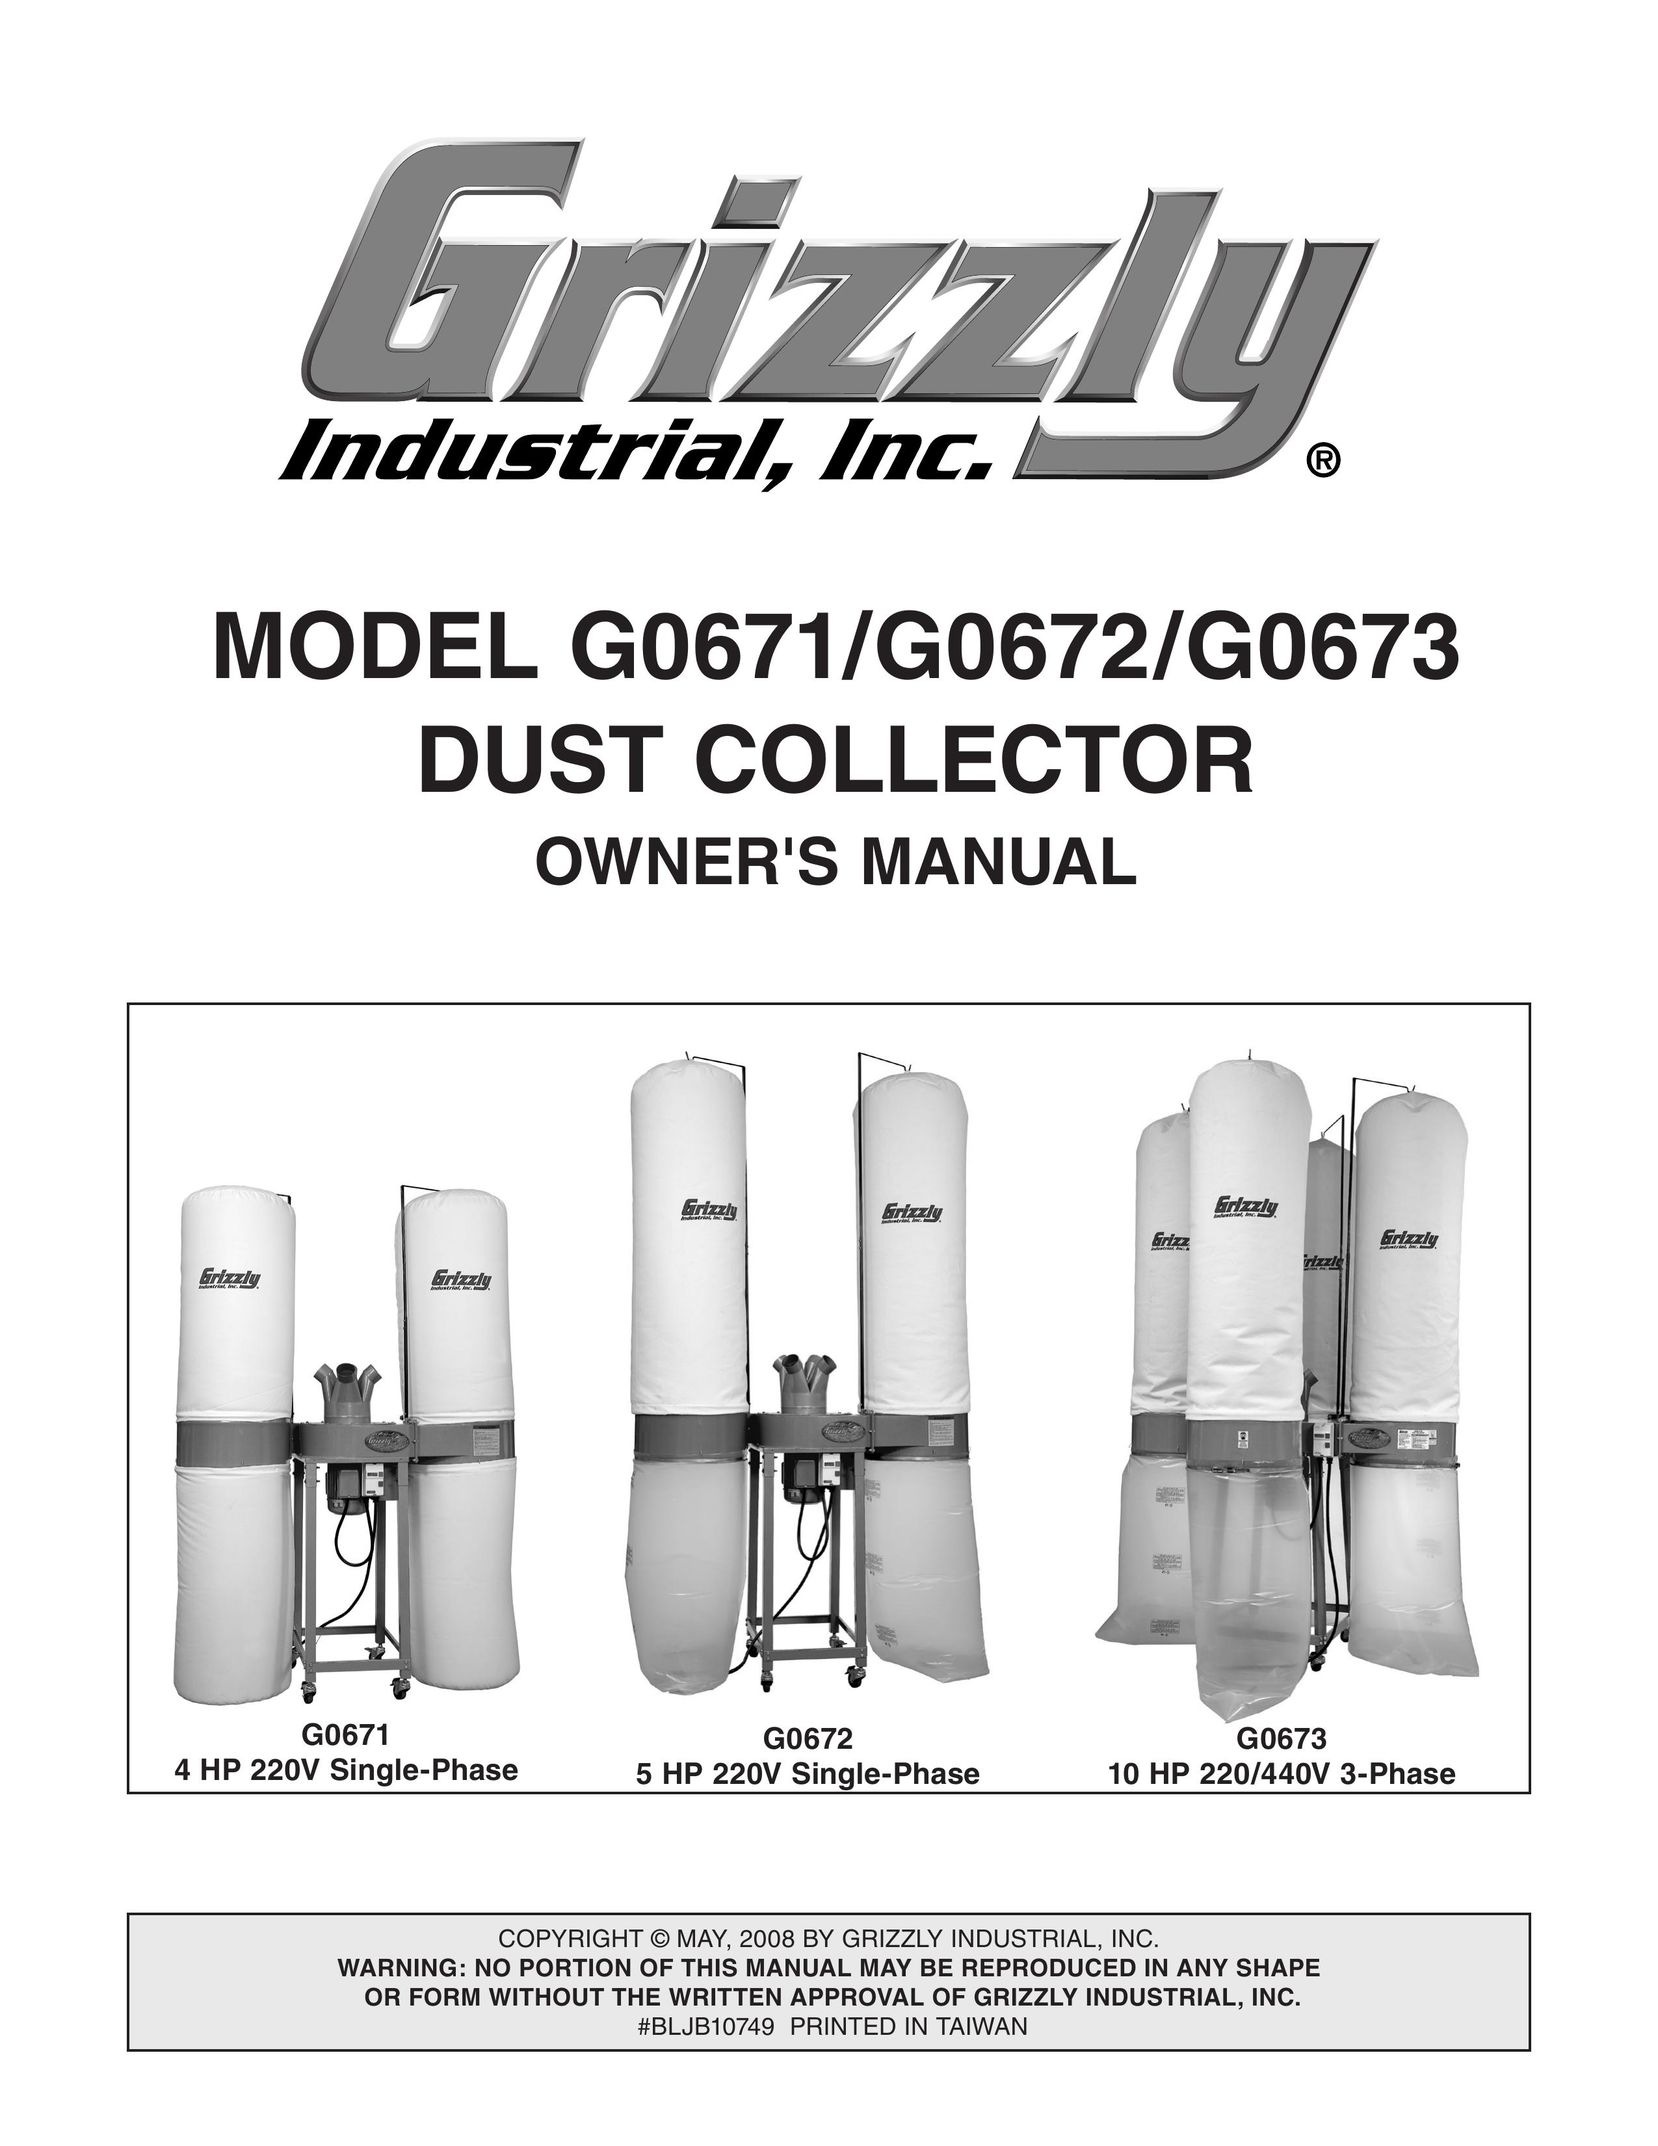 Grizzly G0673 Dust Collector User Manual